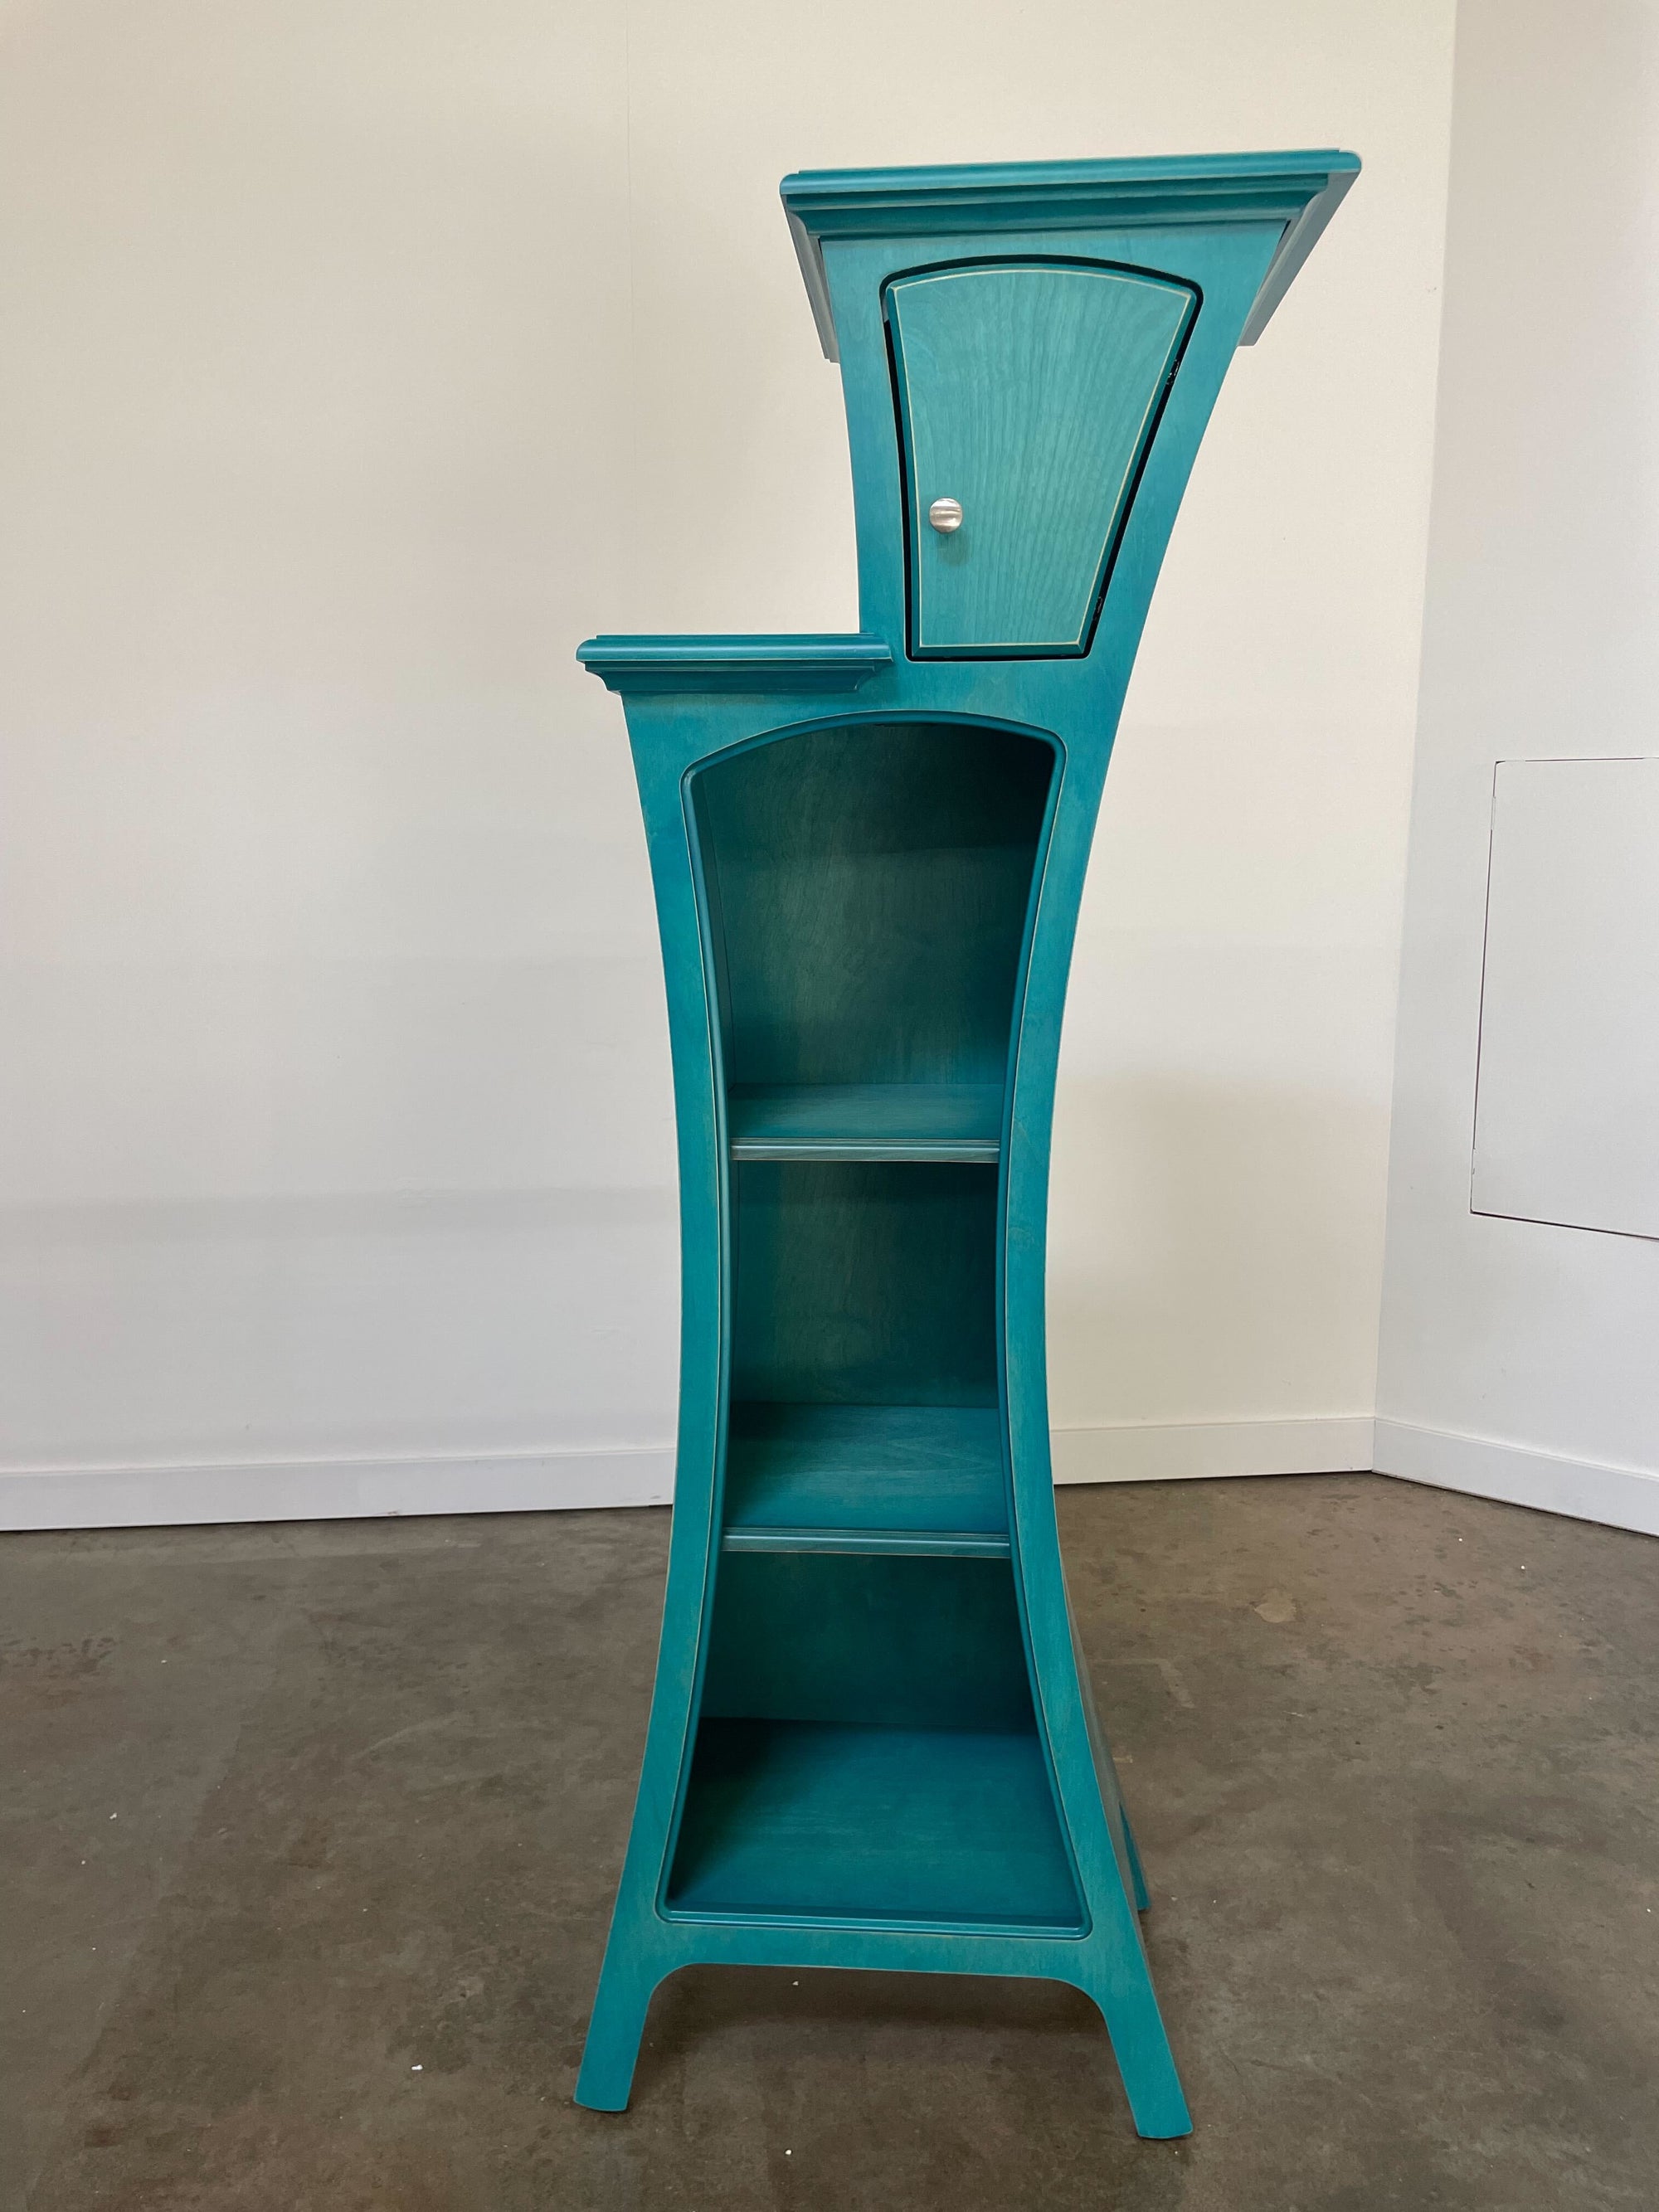 *SALE* - Cabinet No. 4 - Turquoise Stain